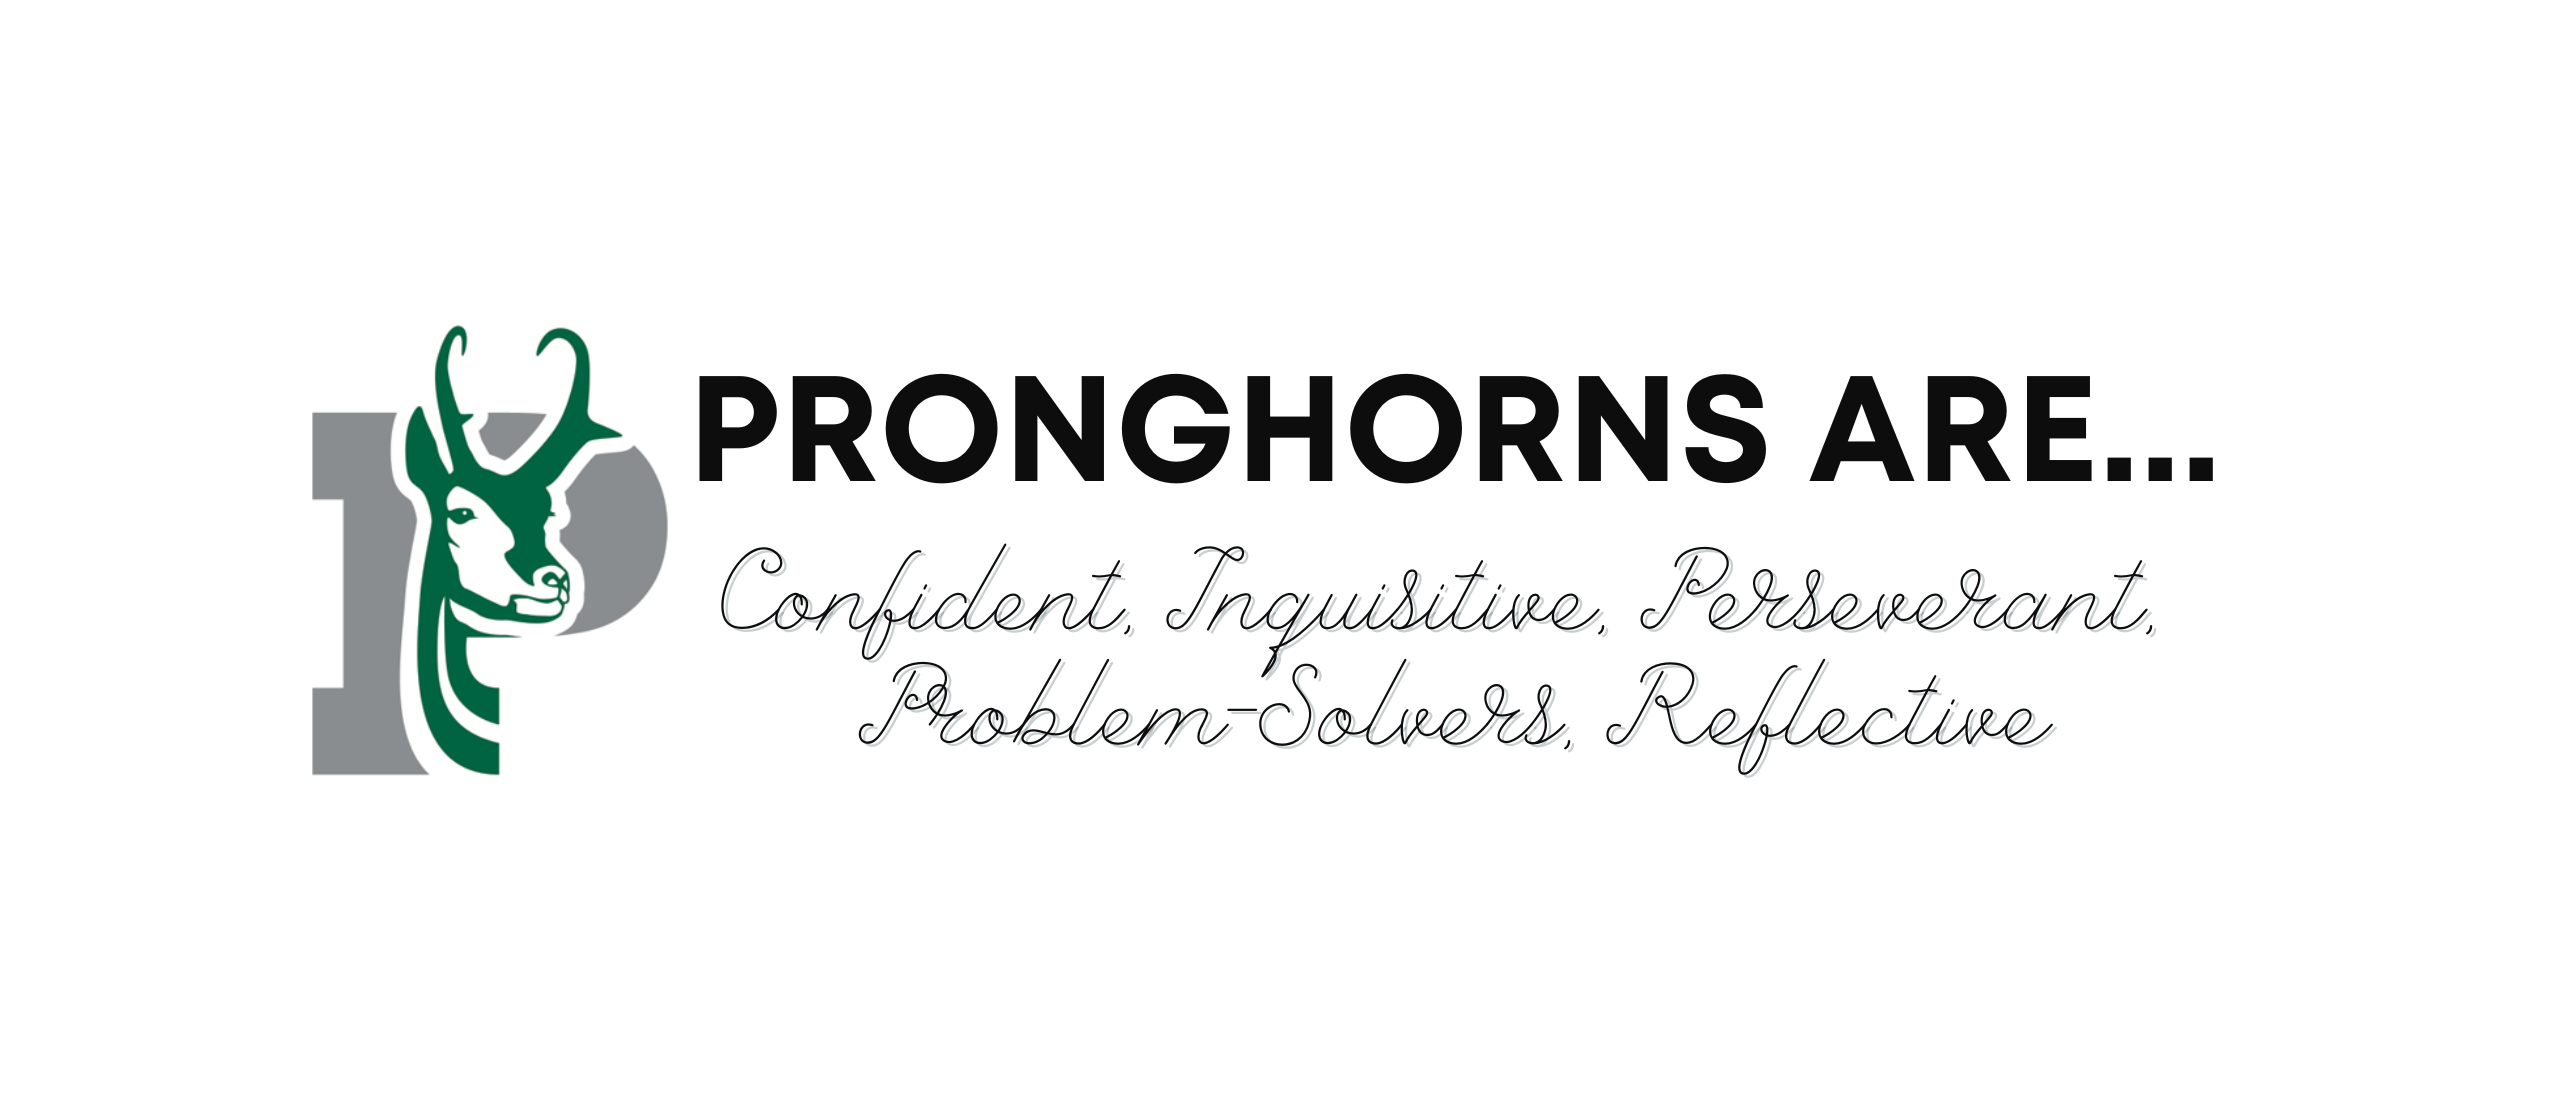 pronghorns are confident